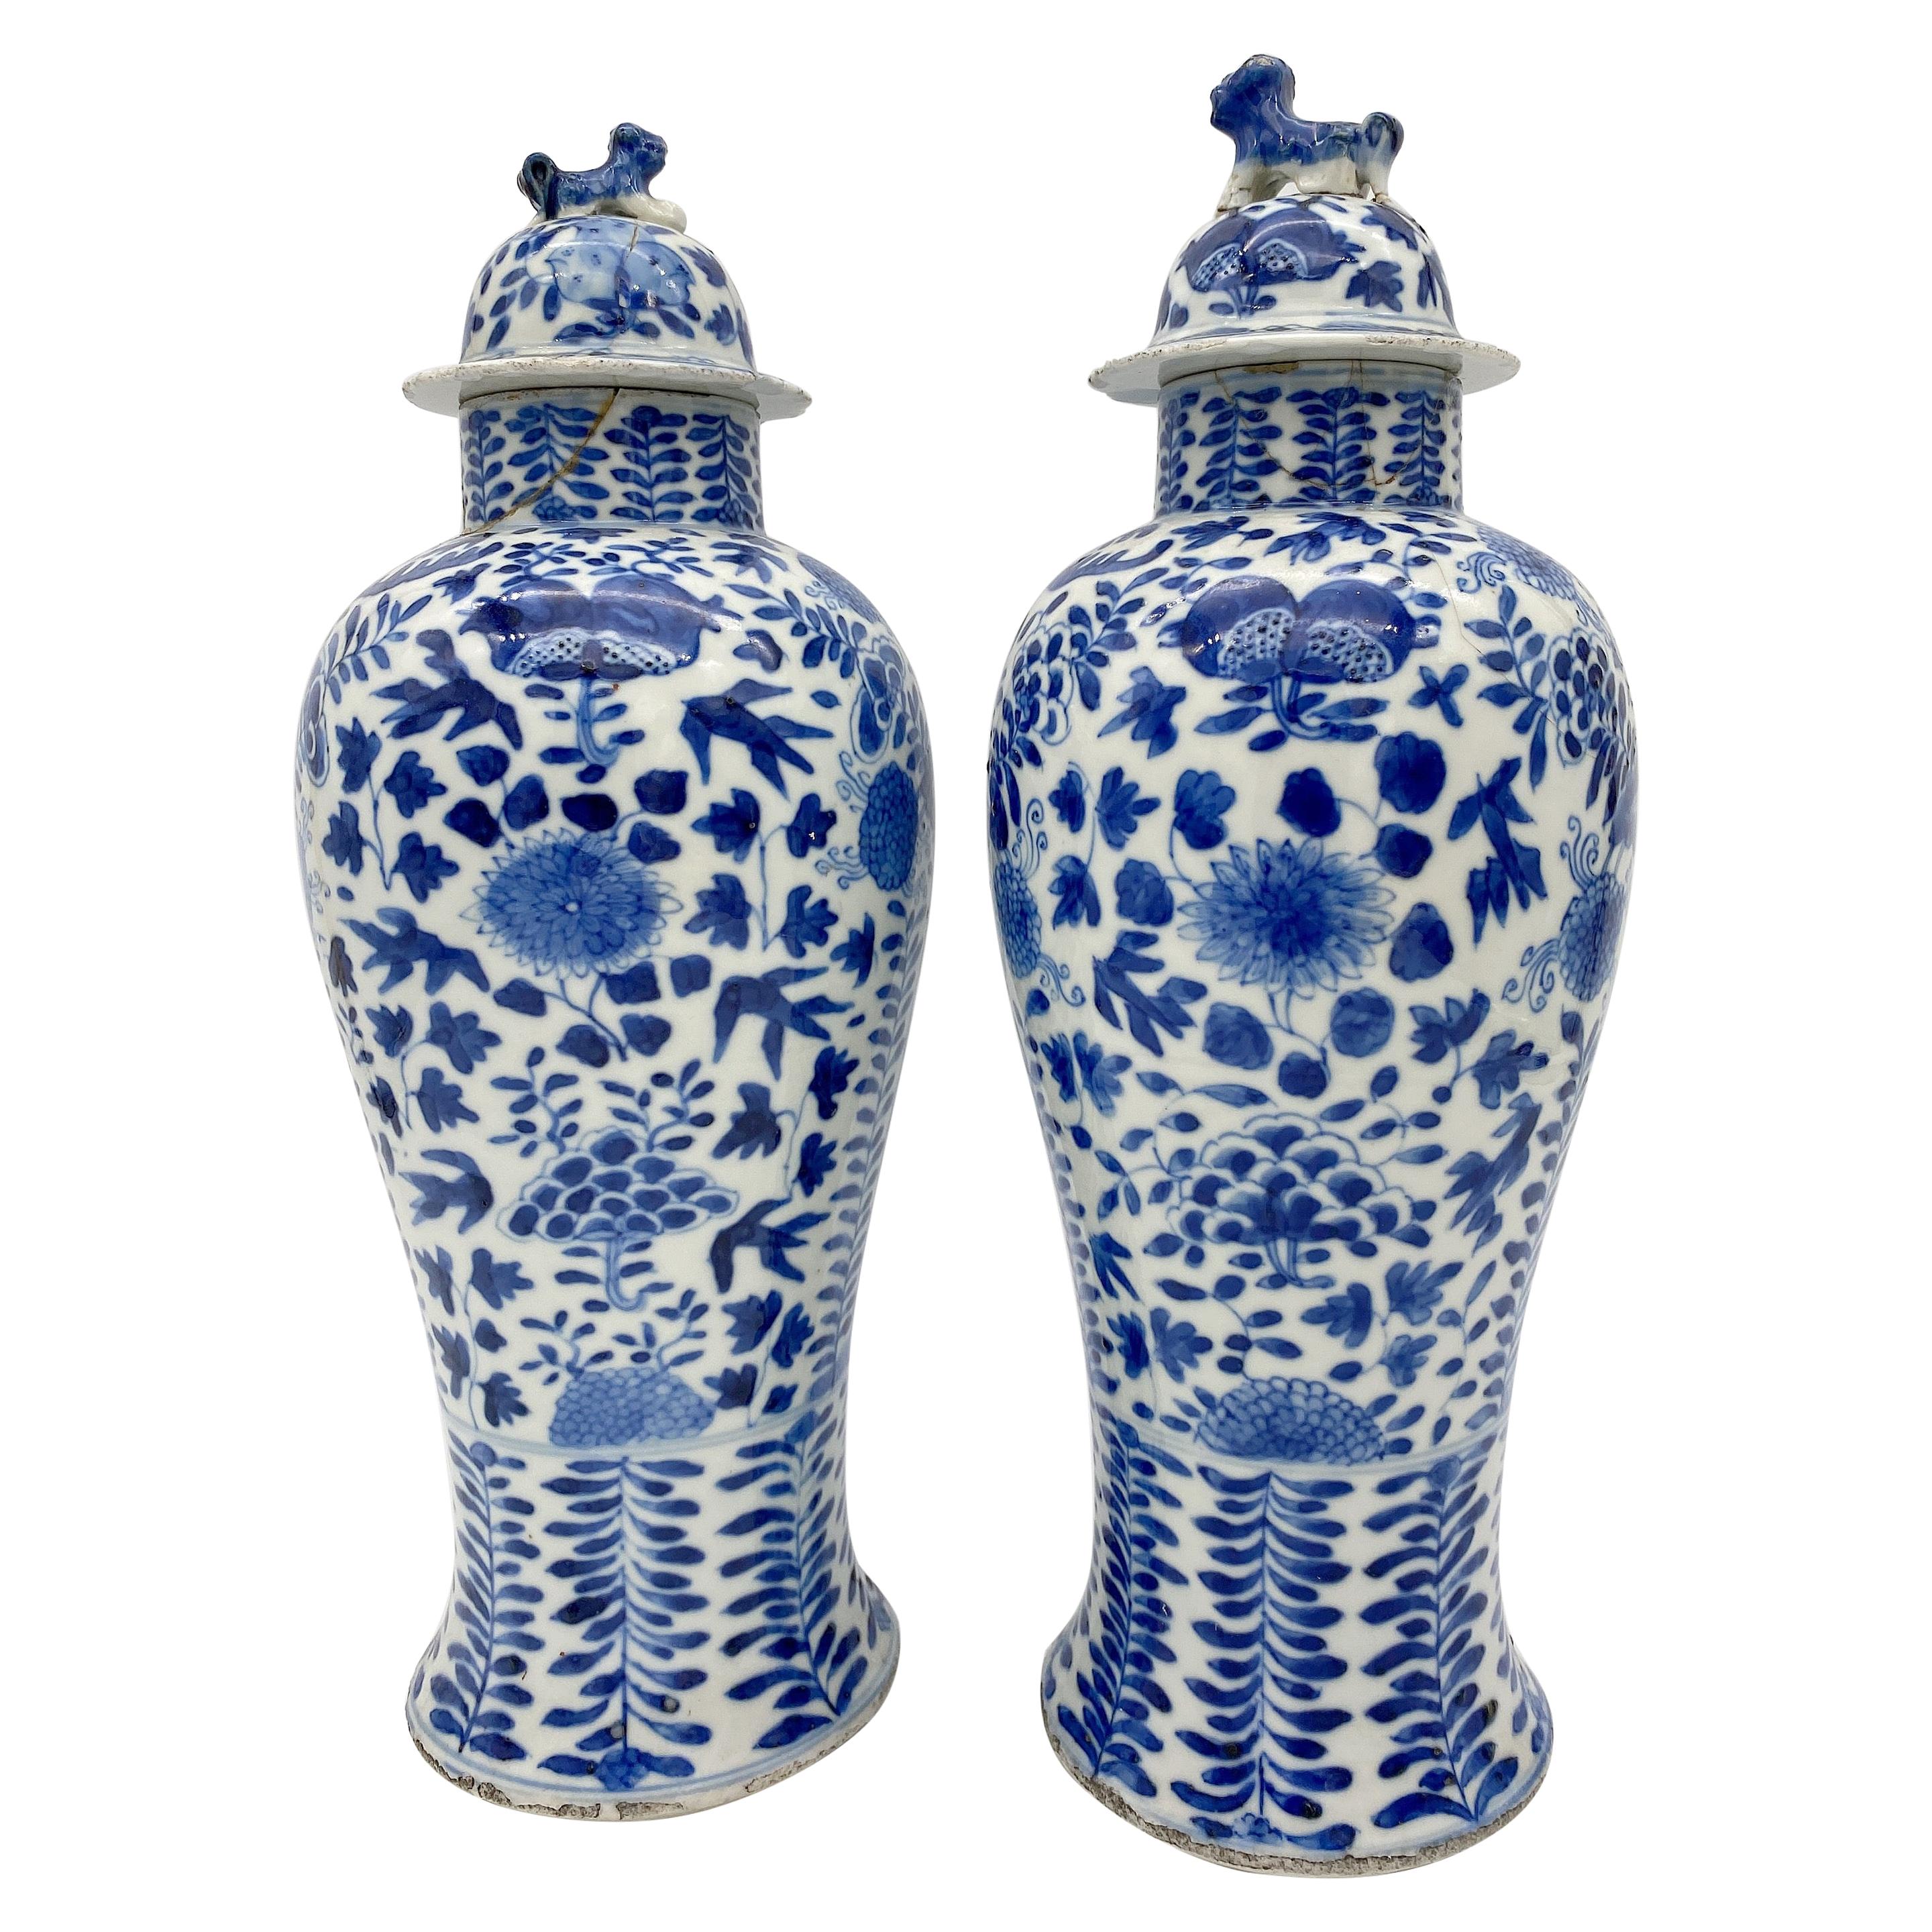 18th Century Antique Pair of Chinese Blue and White Porcelain Jars and Covers